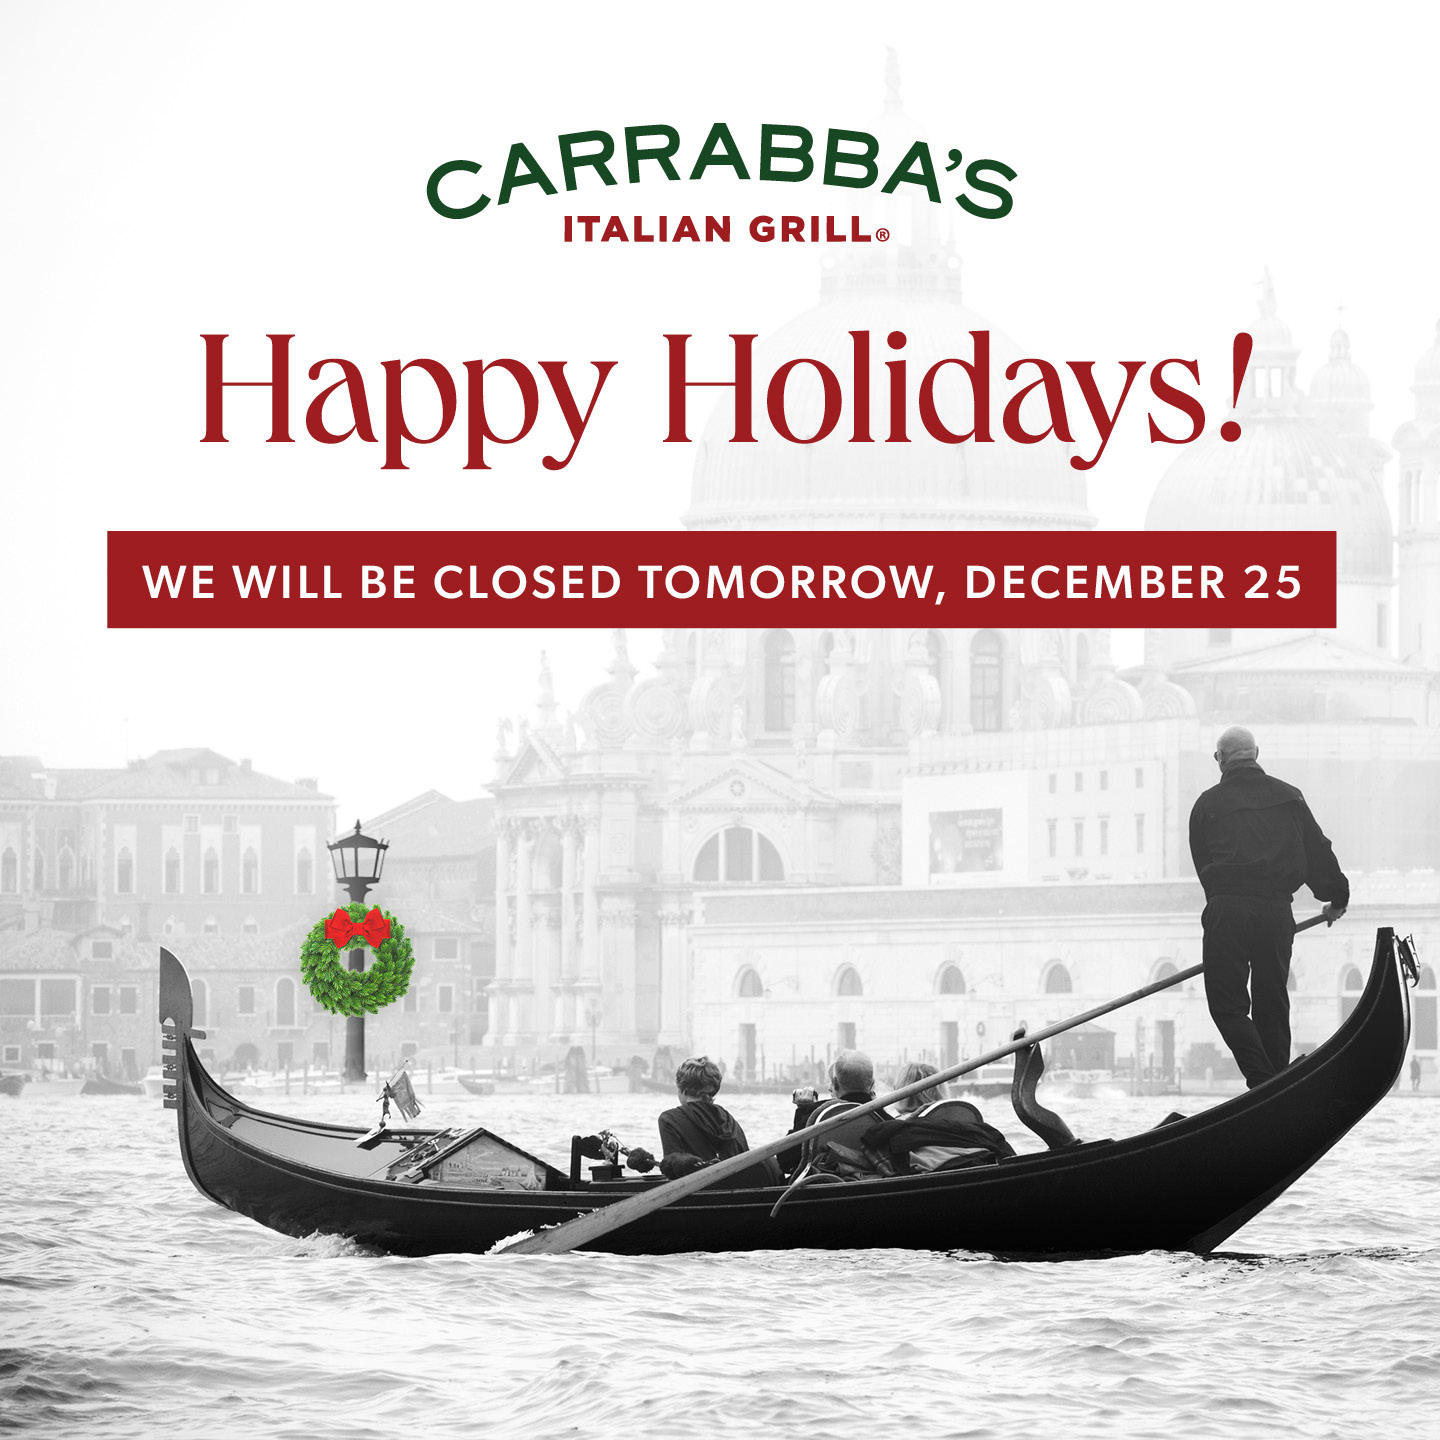 Carrabba's Italian Grill - We will be closed this evening at 10 pm and tomorrow so that our Micos ca